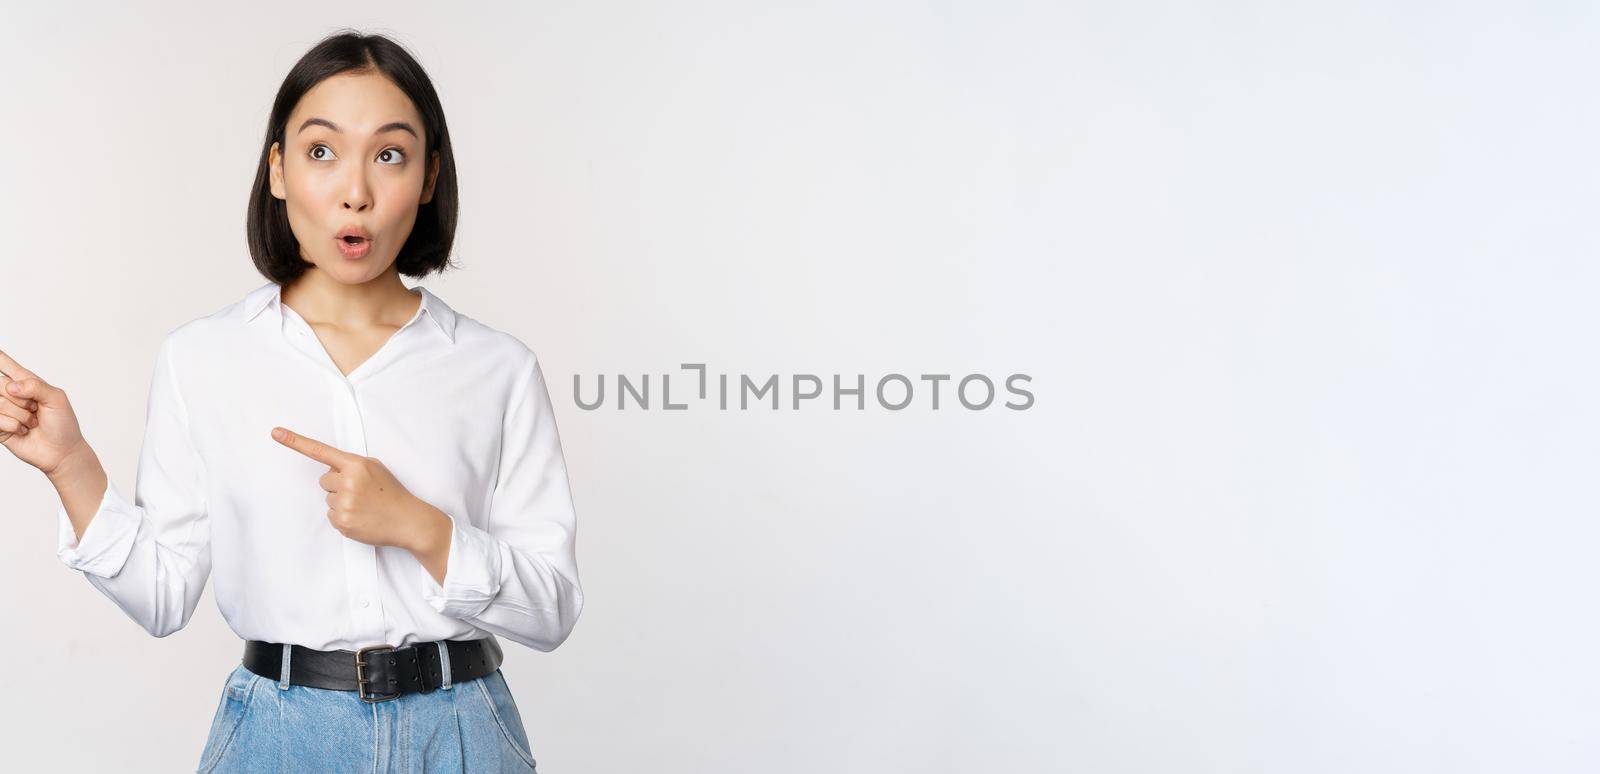 Portrait of attractive adult asian woman pointing, looking left with pleased smile, showing banner or logo aside, standing against white studio background.